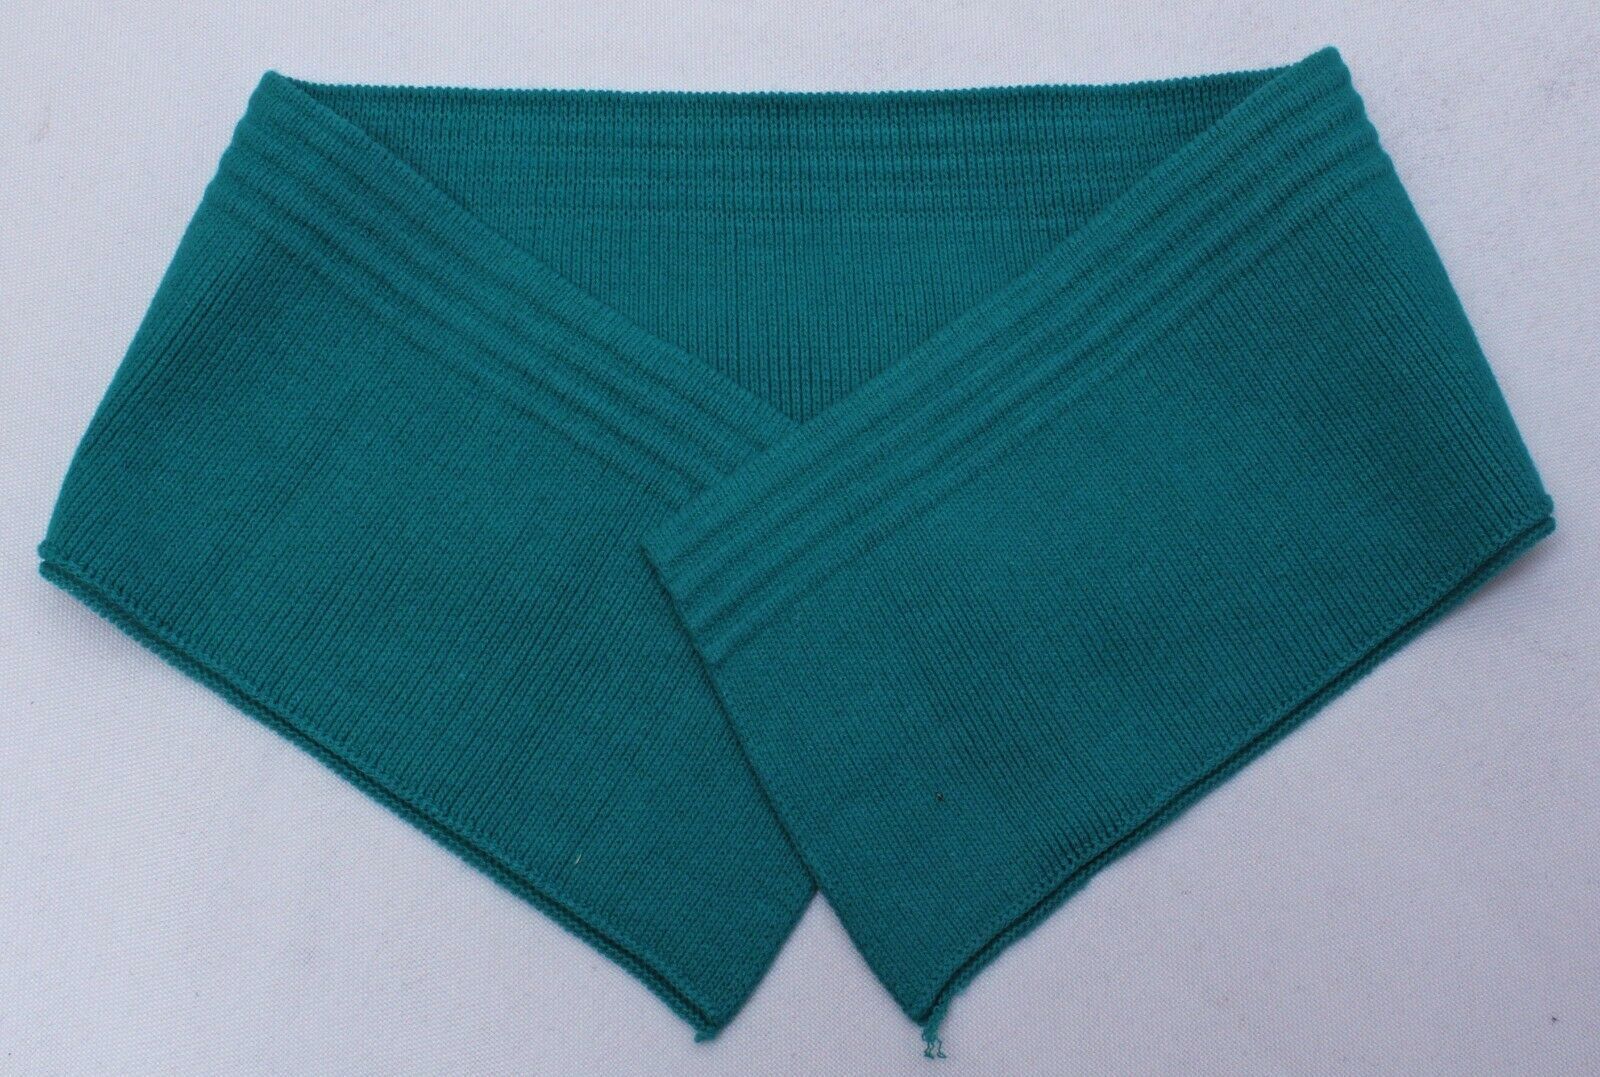 Primary image for Rugby Knit Shirt Collar Turquoise Self-Finished Hemmed Ribbed Trim M515.06